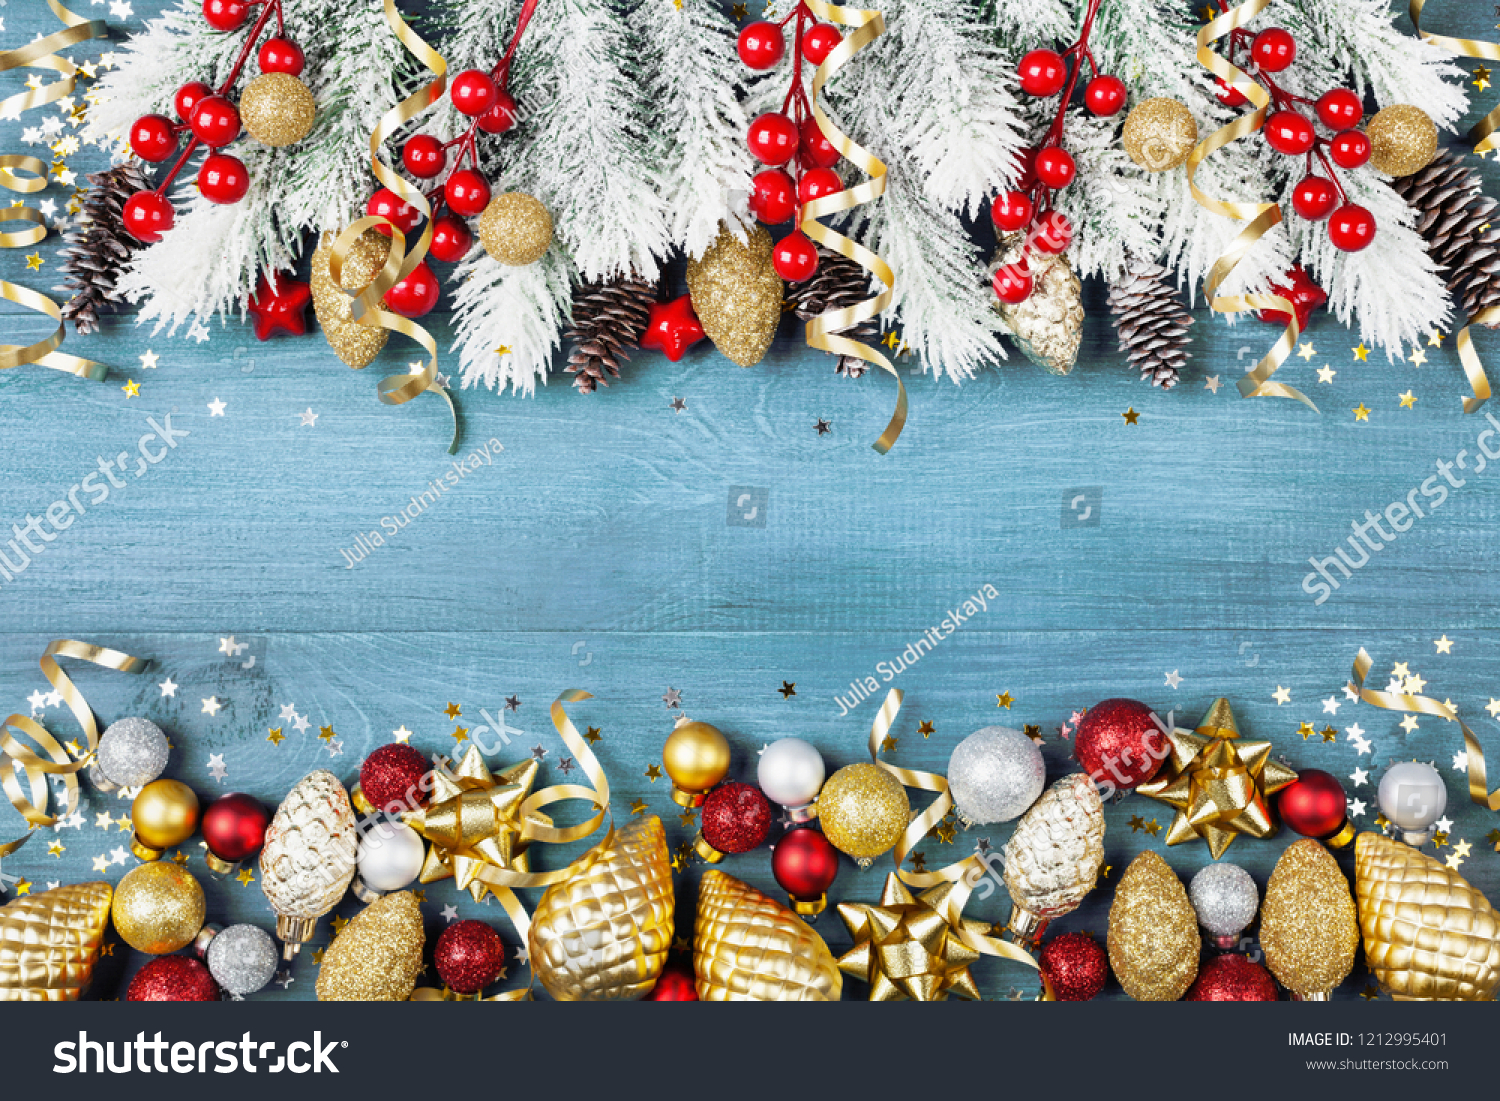 Christmas background with snowy fir tree and shiny holiday decorations on blue wooden table top view. Greeting card with space for text. #1212995401